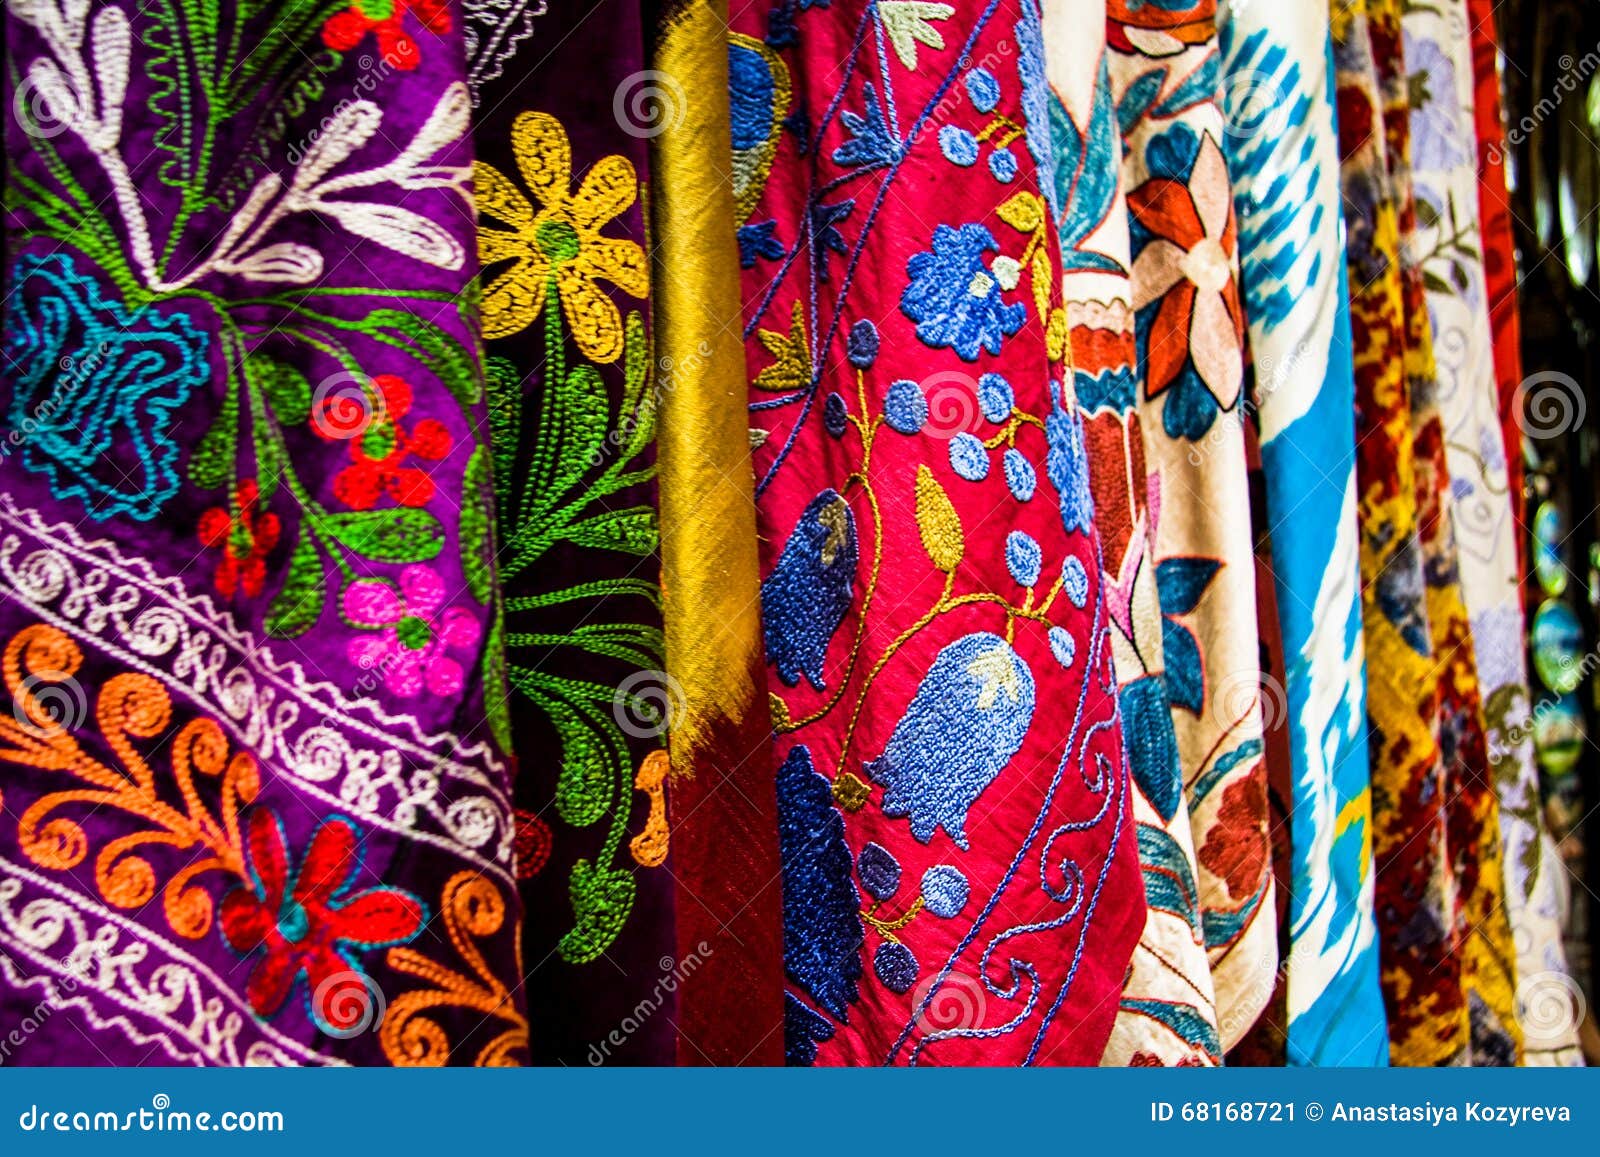 colorful textile at the grand bazar, istanbul, turkey